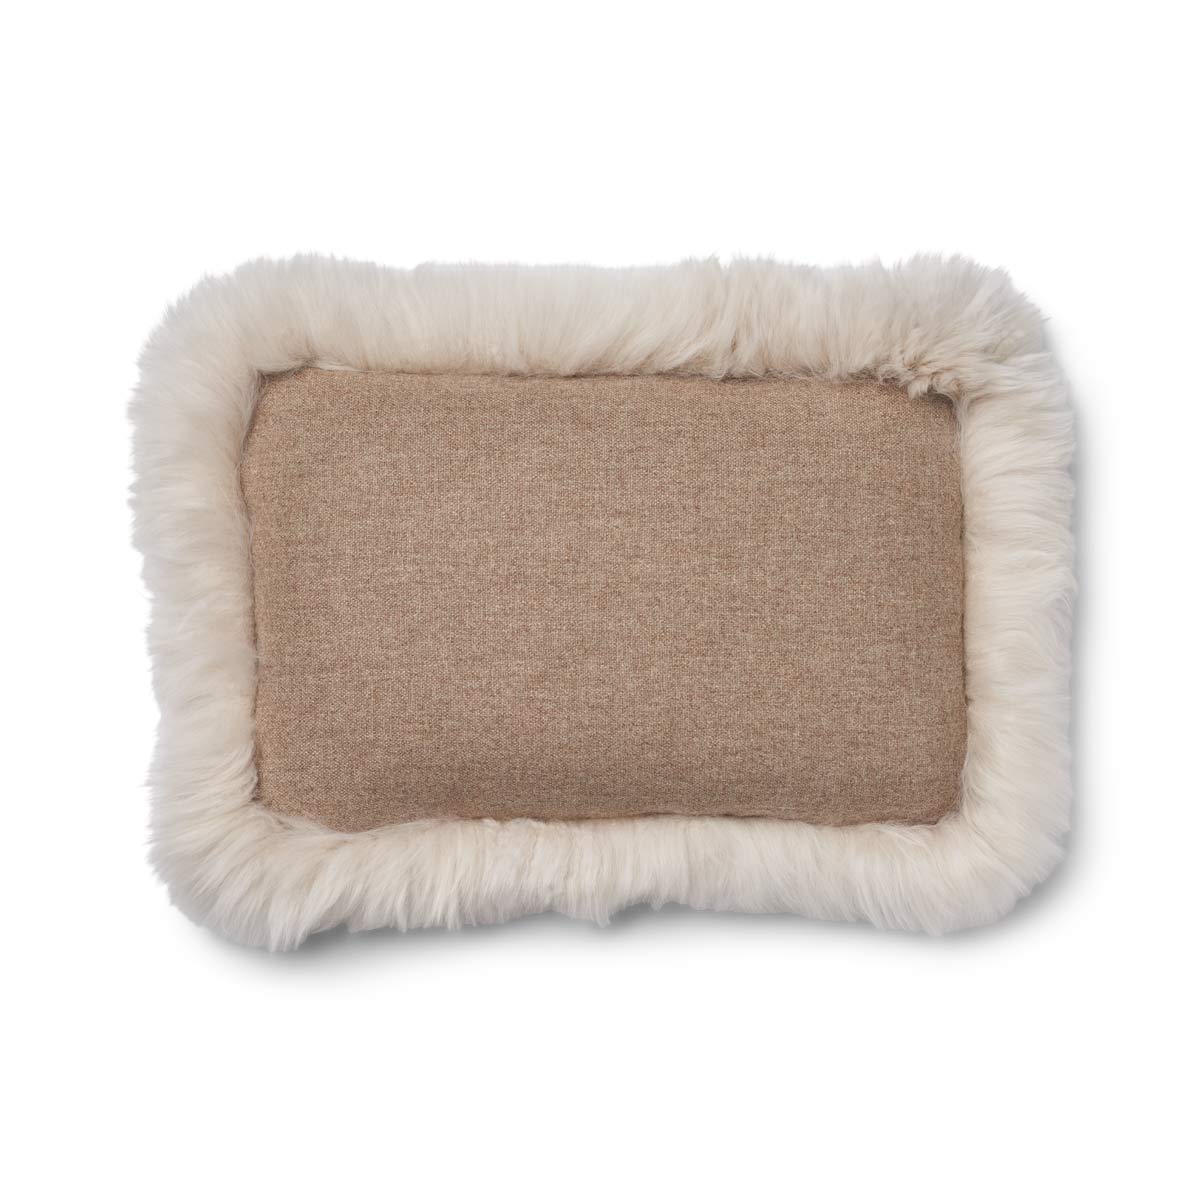 Classic Collection, Doublesided 100%  Wool Cushion and LW New Zealand Sheepskin Trimming. Size: 34x52 cm.